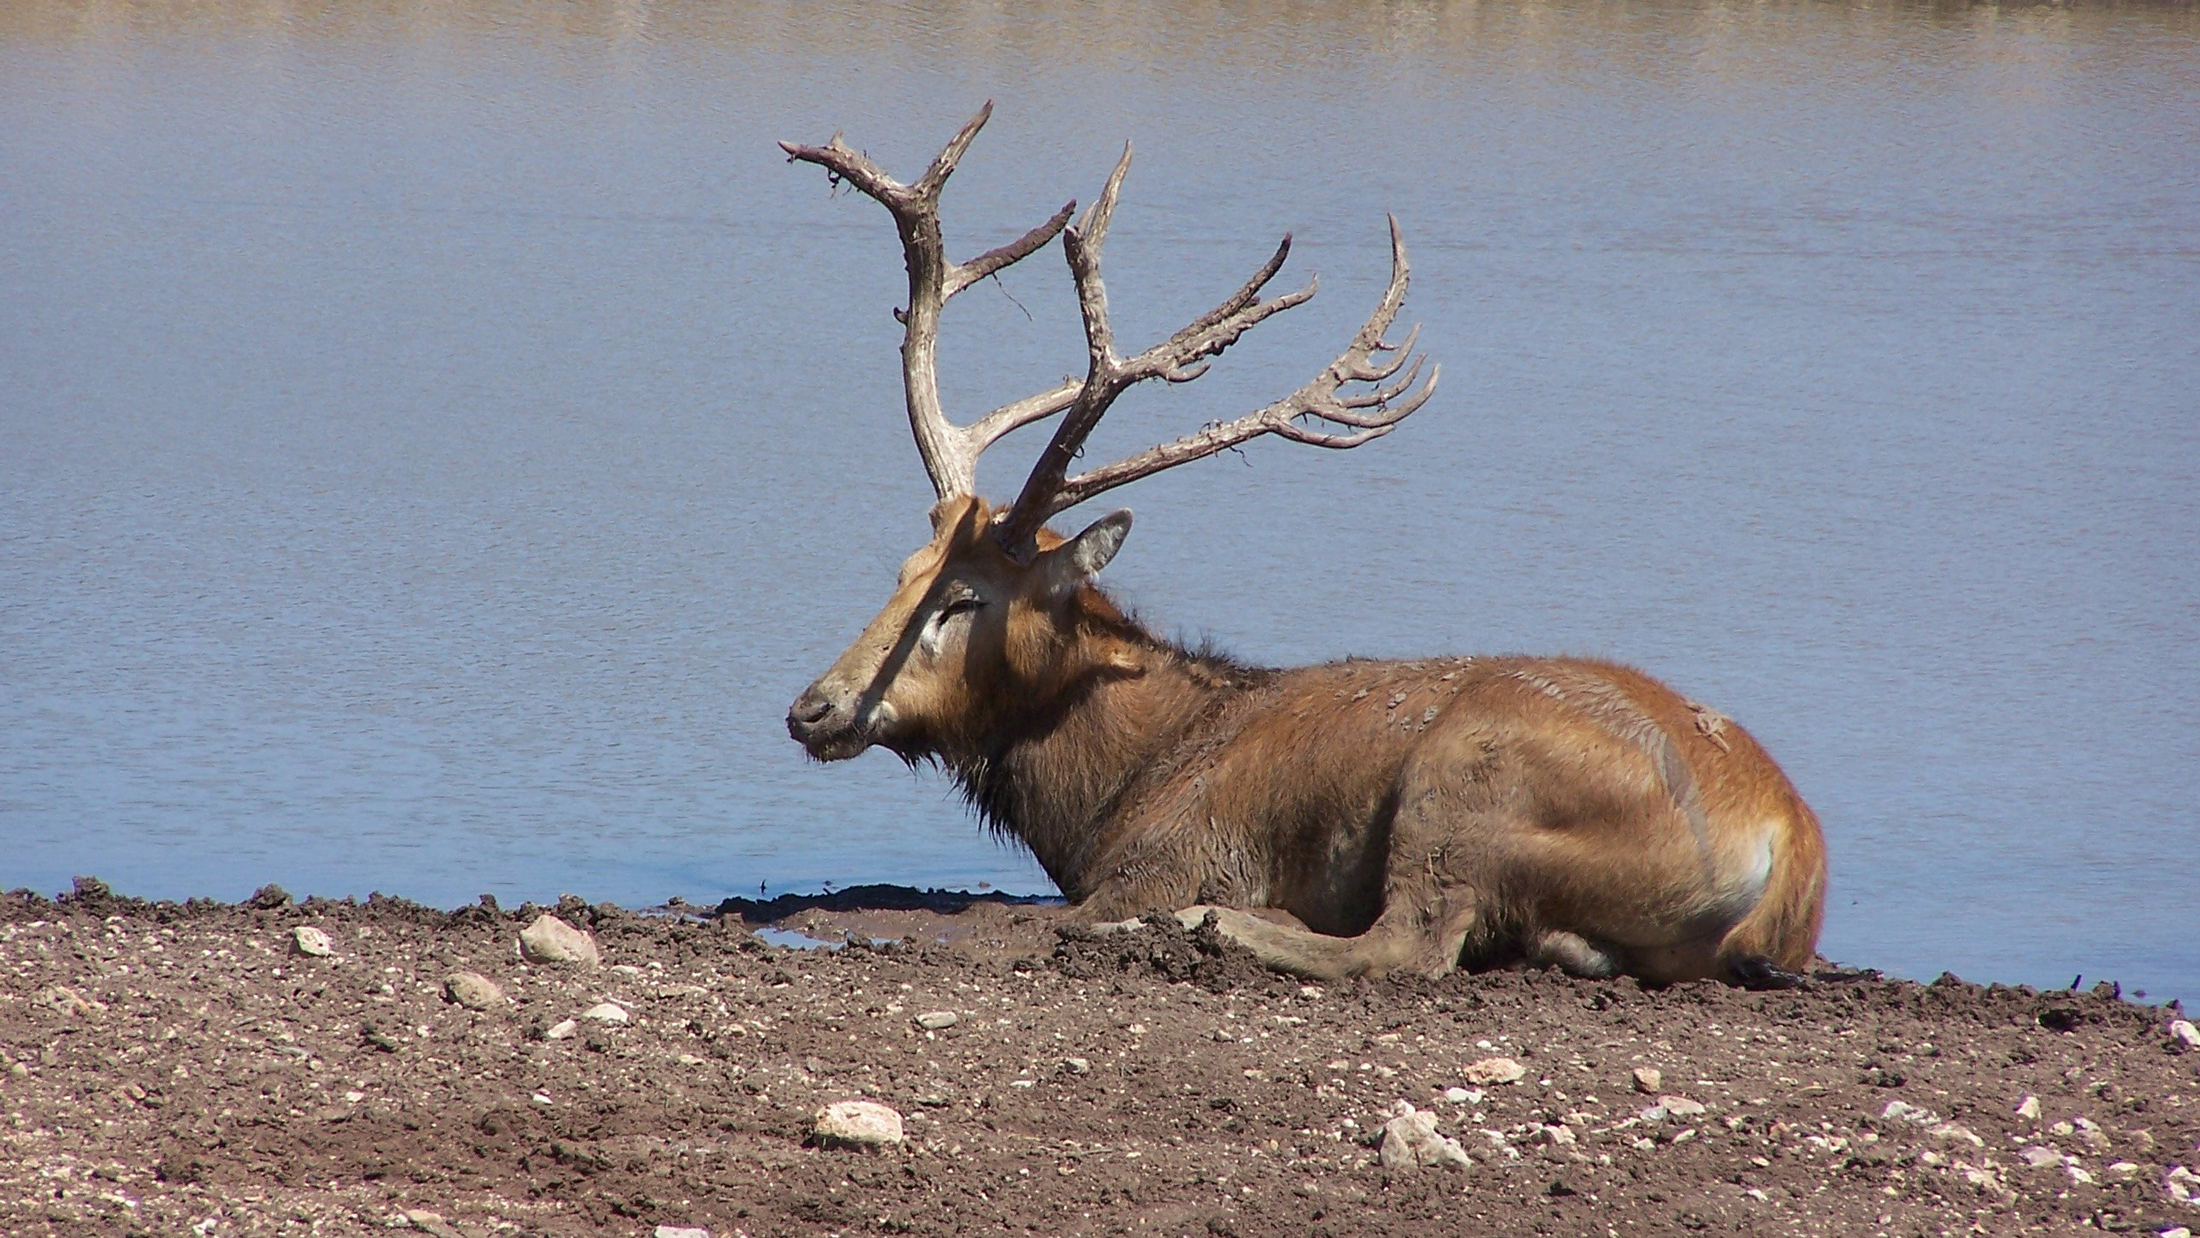 Saved by Chance: The Incredibly Strange Story of the Pere David's Deer